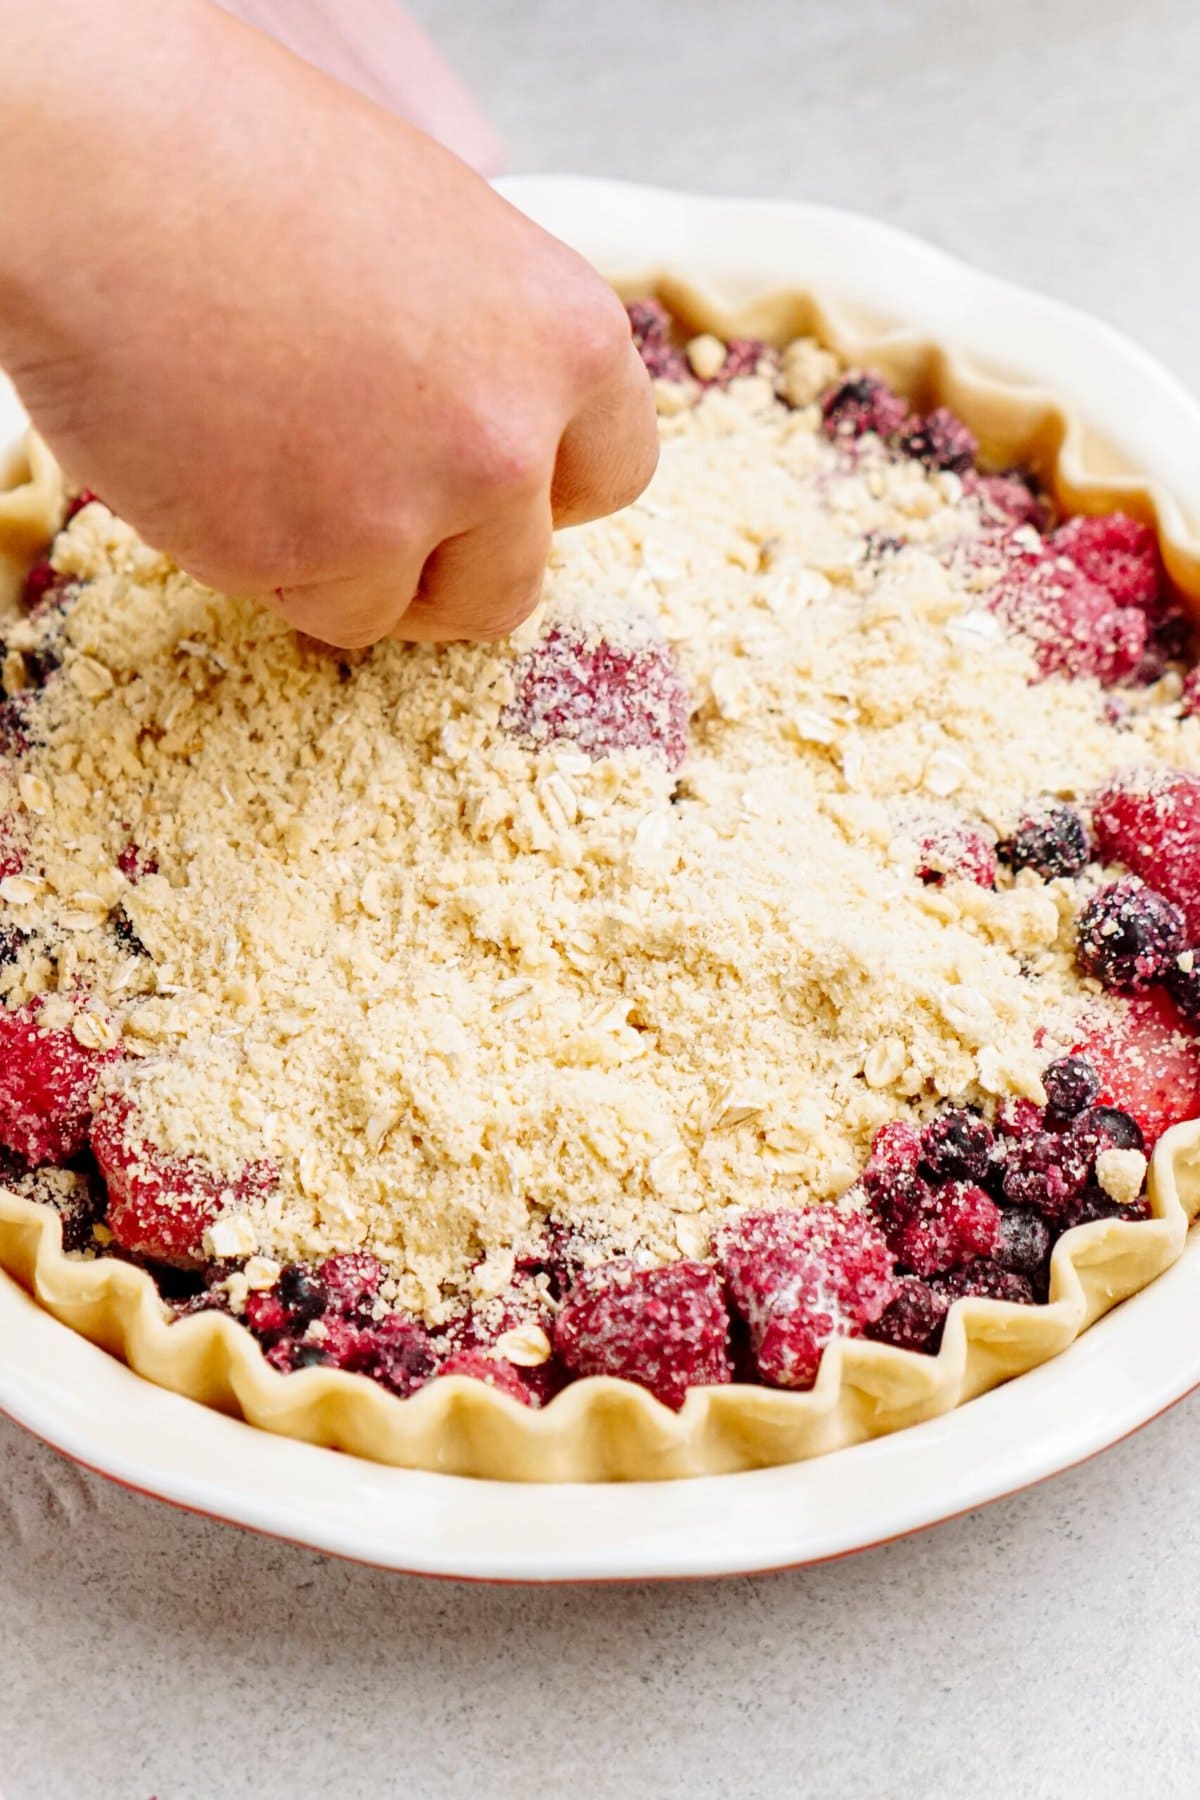 A person sprinkles a crumb topping on a mixed berry pie with a fluted crust, preparing it for baking.